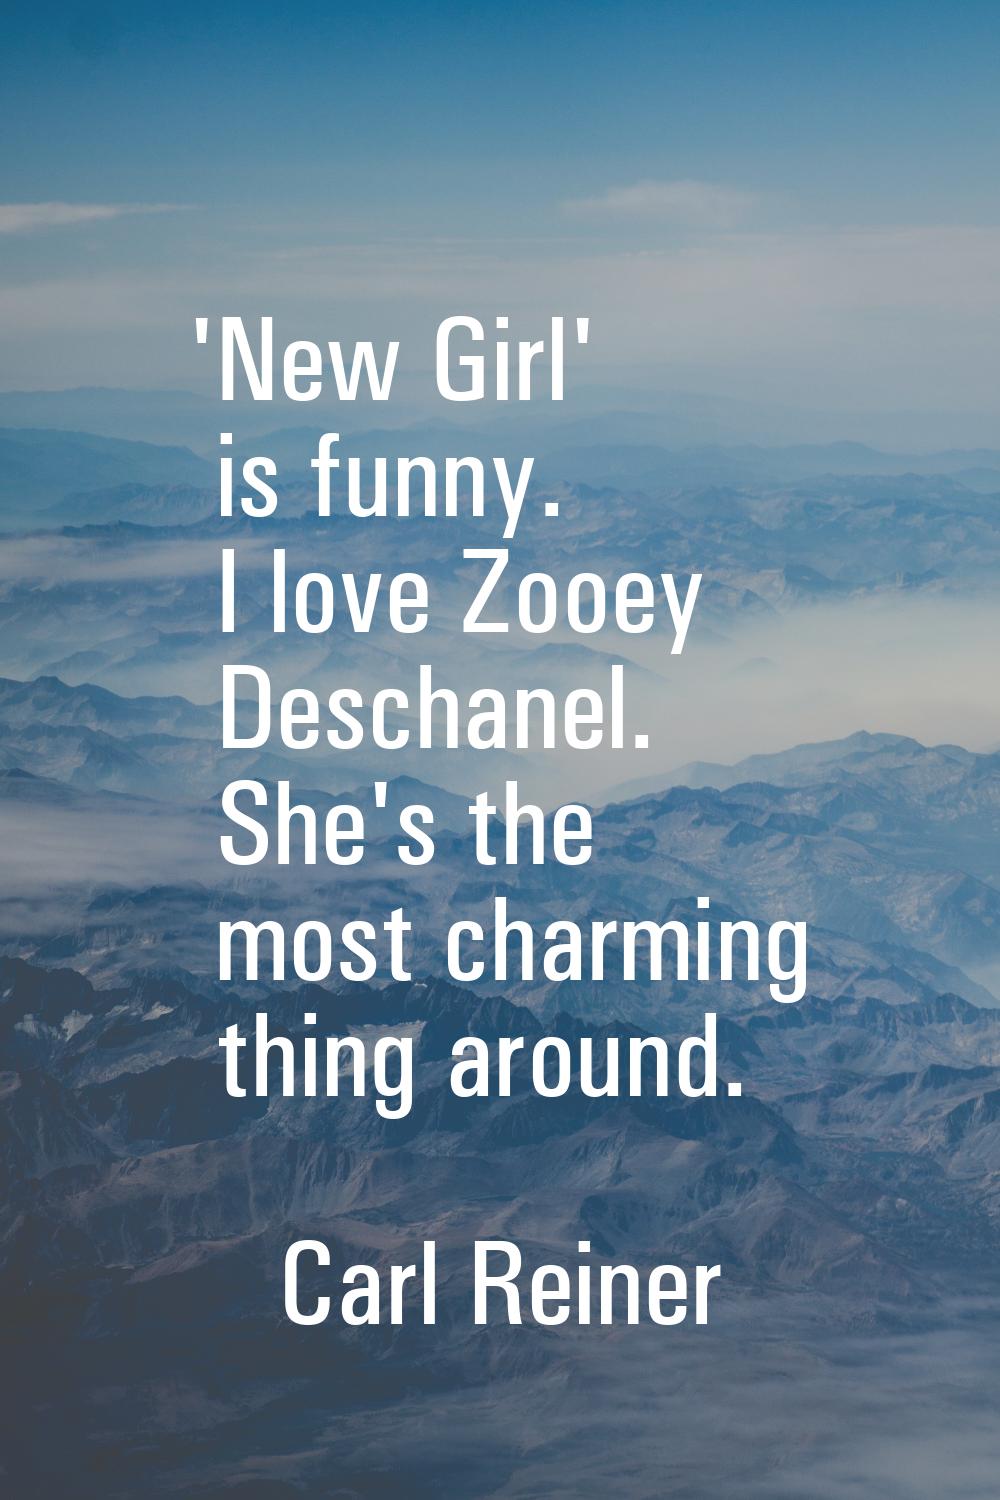 'New Girl' is funny. I love Zooey Deschanel. She's the most charming thing around.